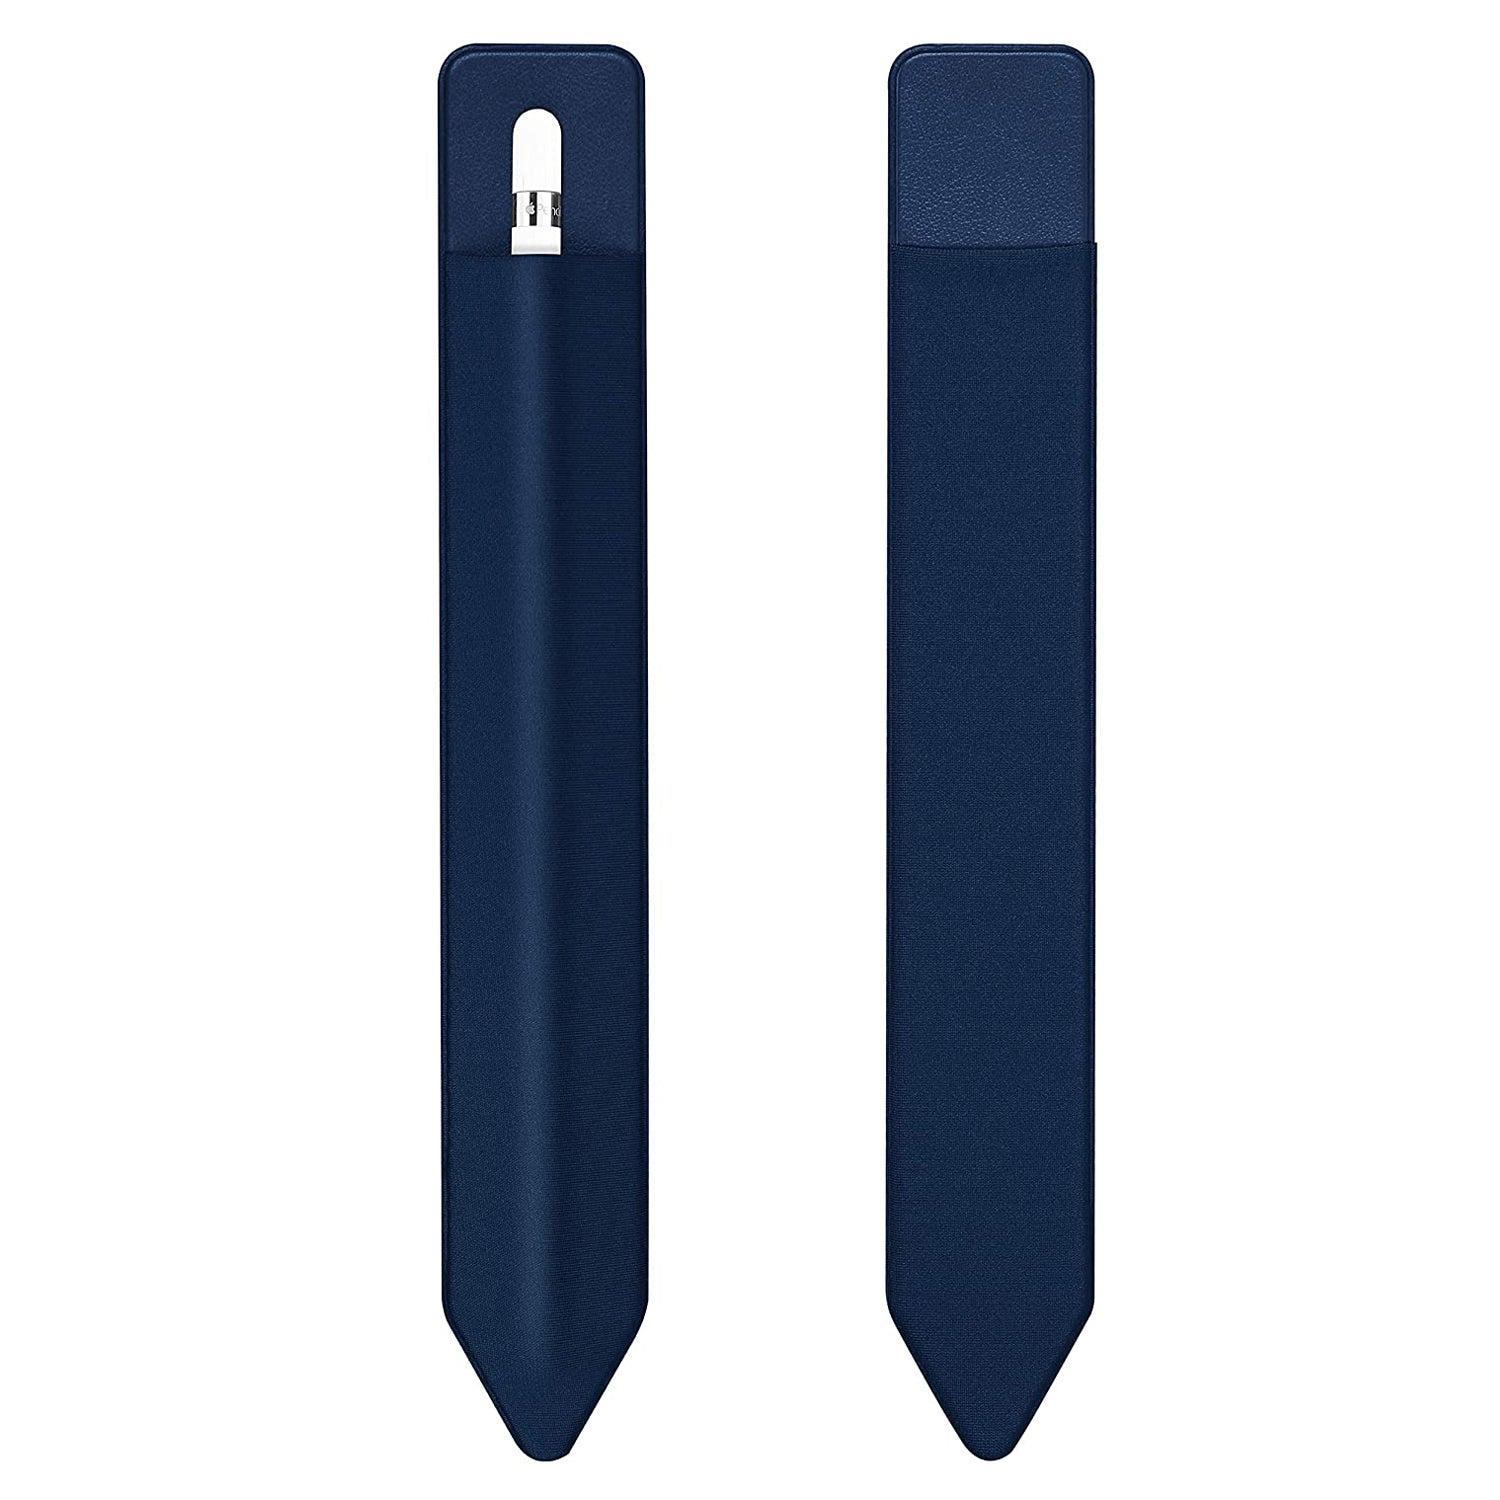 Pencil Holder Adhesive Sticker for Apple Pencil 1st and 2nd Gen Navy